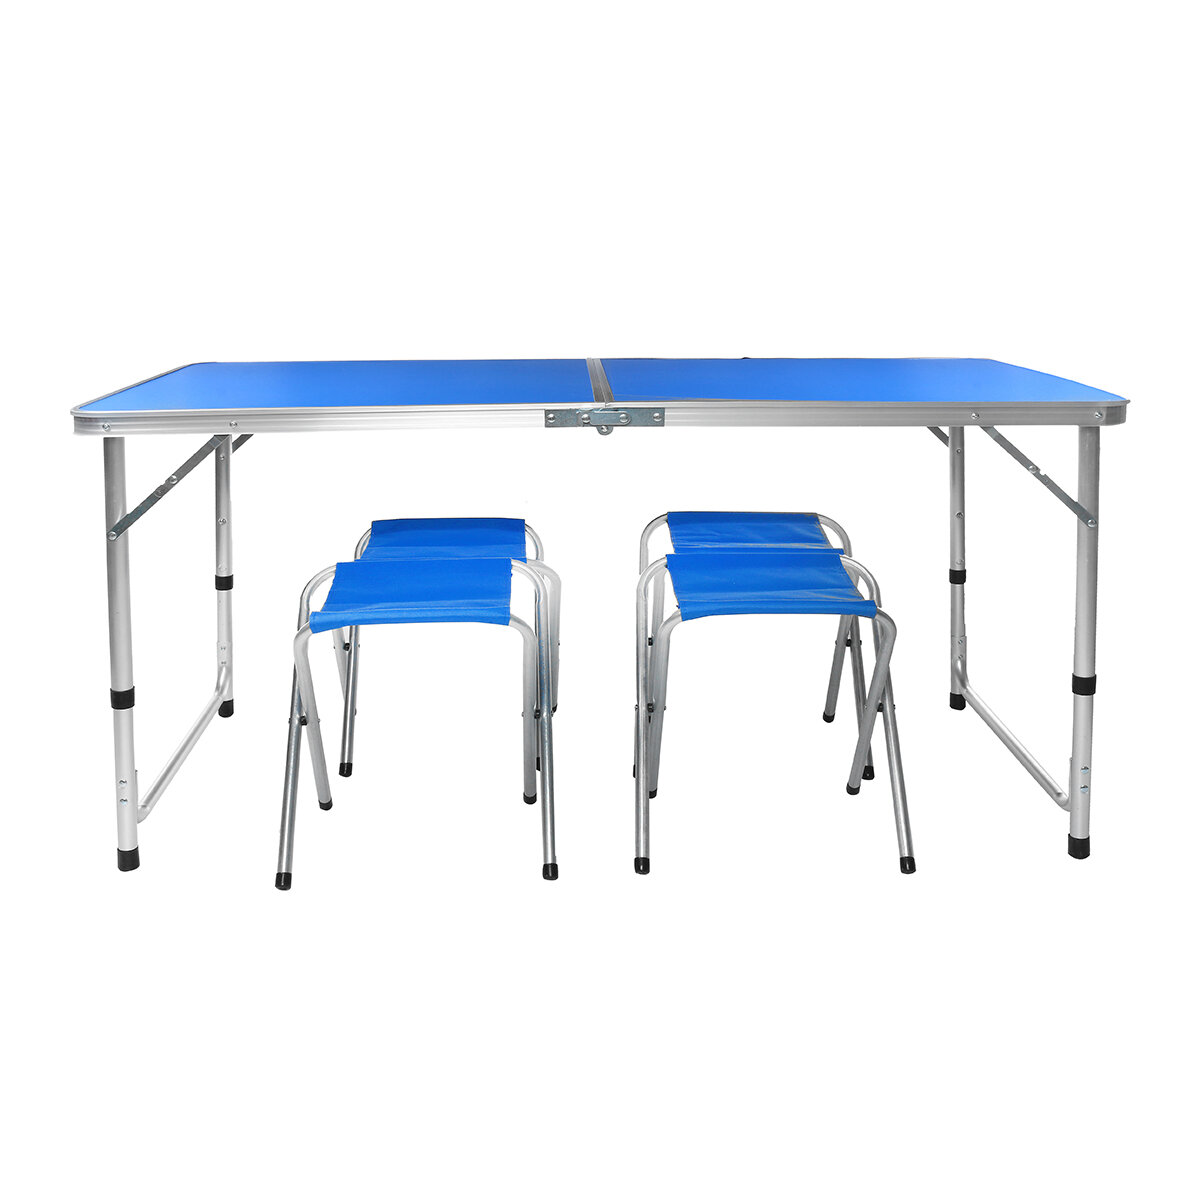 1.2m Blue Folding Table Portable Indoor Outdoor BBQ Picnic Party Camp Tables